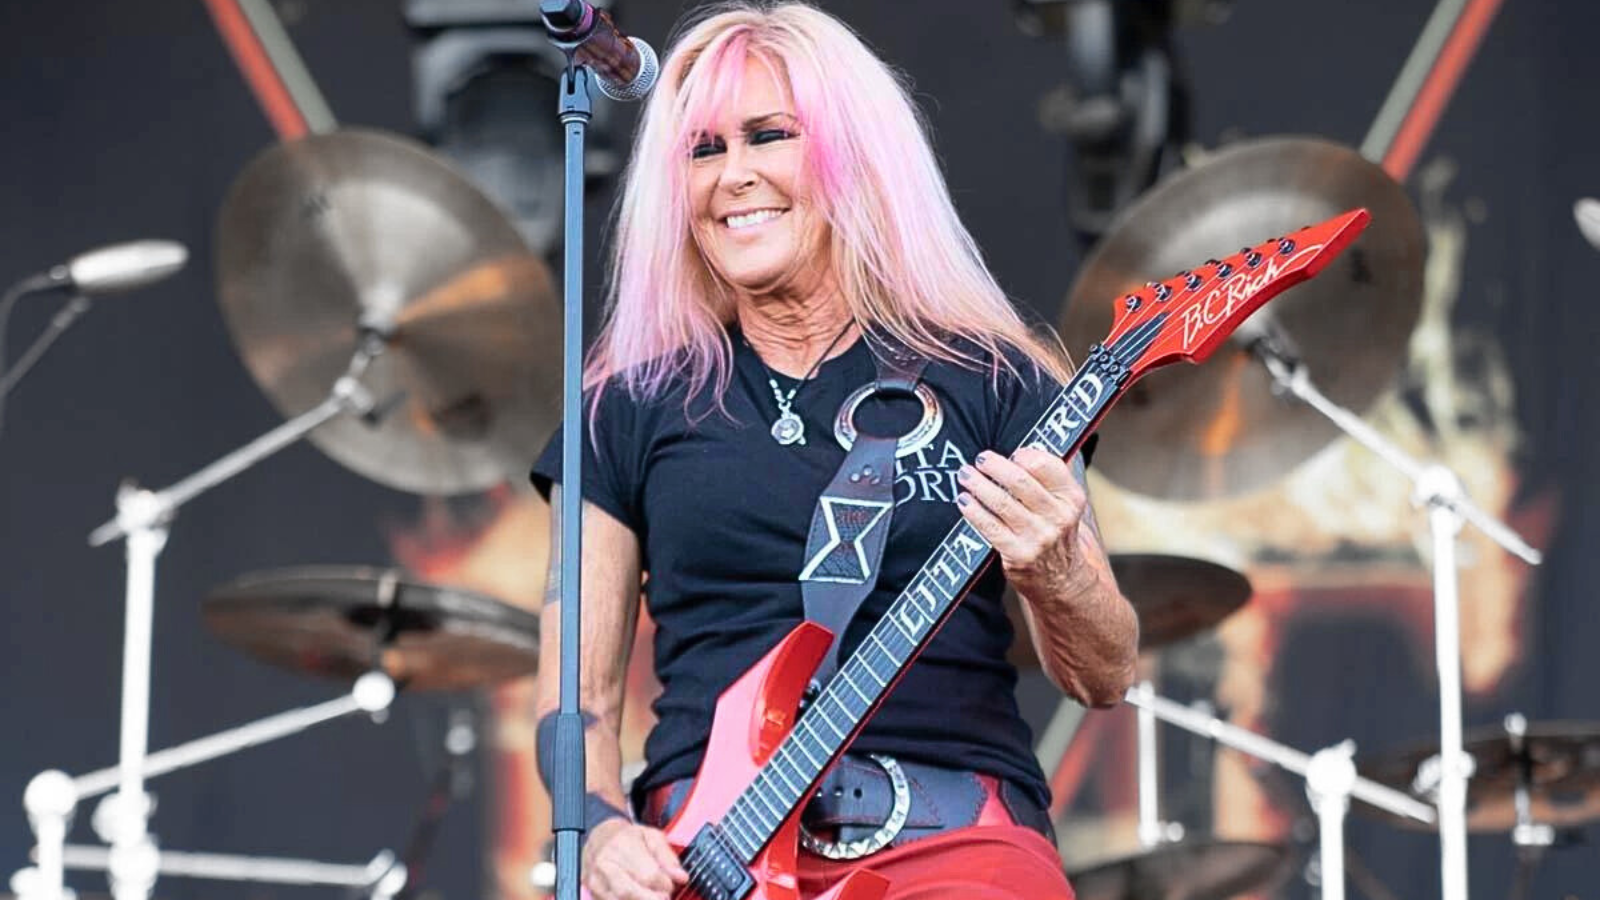 'They Couldn't Put Together That She's a Female Playing Guitar': Lita Ford Opens Up on Being a Guitarist in Male-Dominated Scene